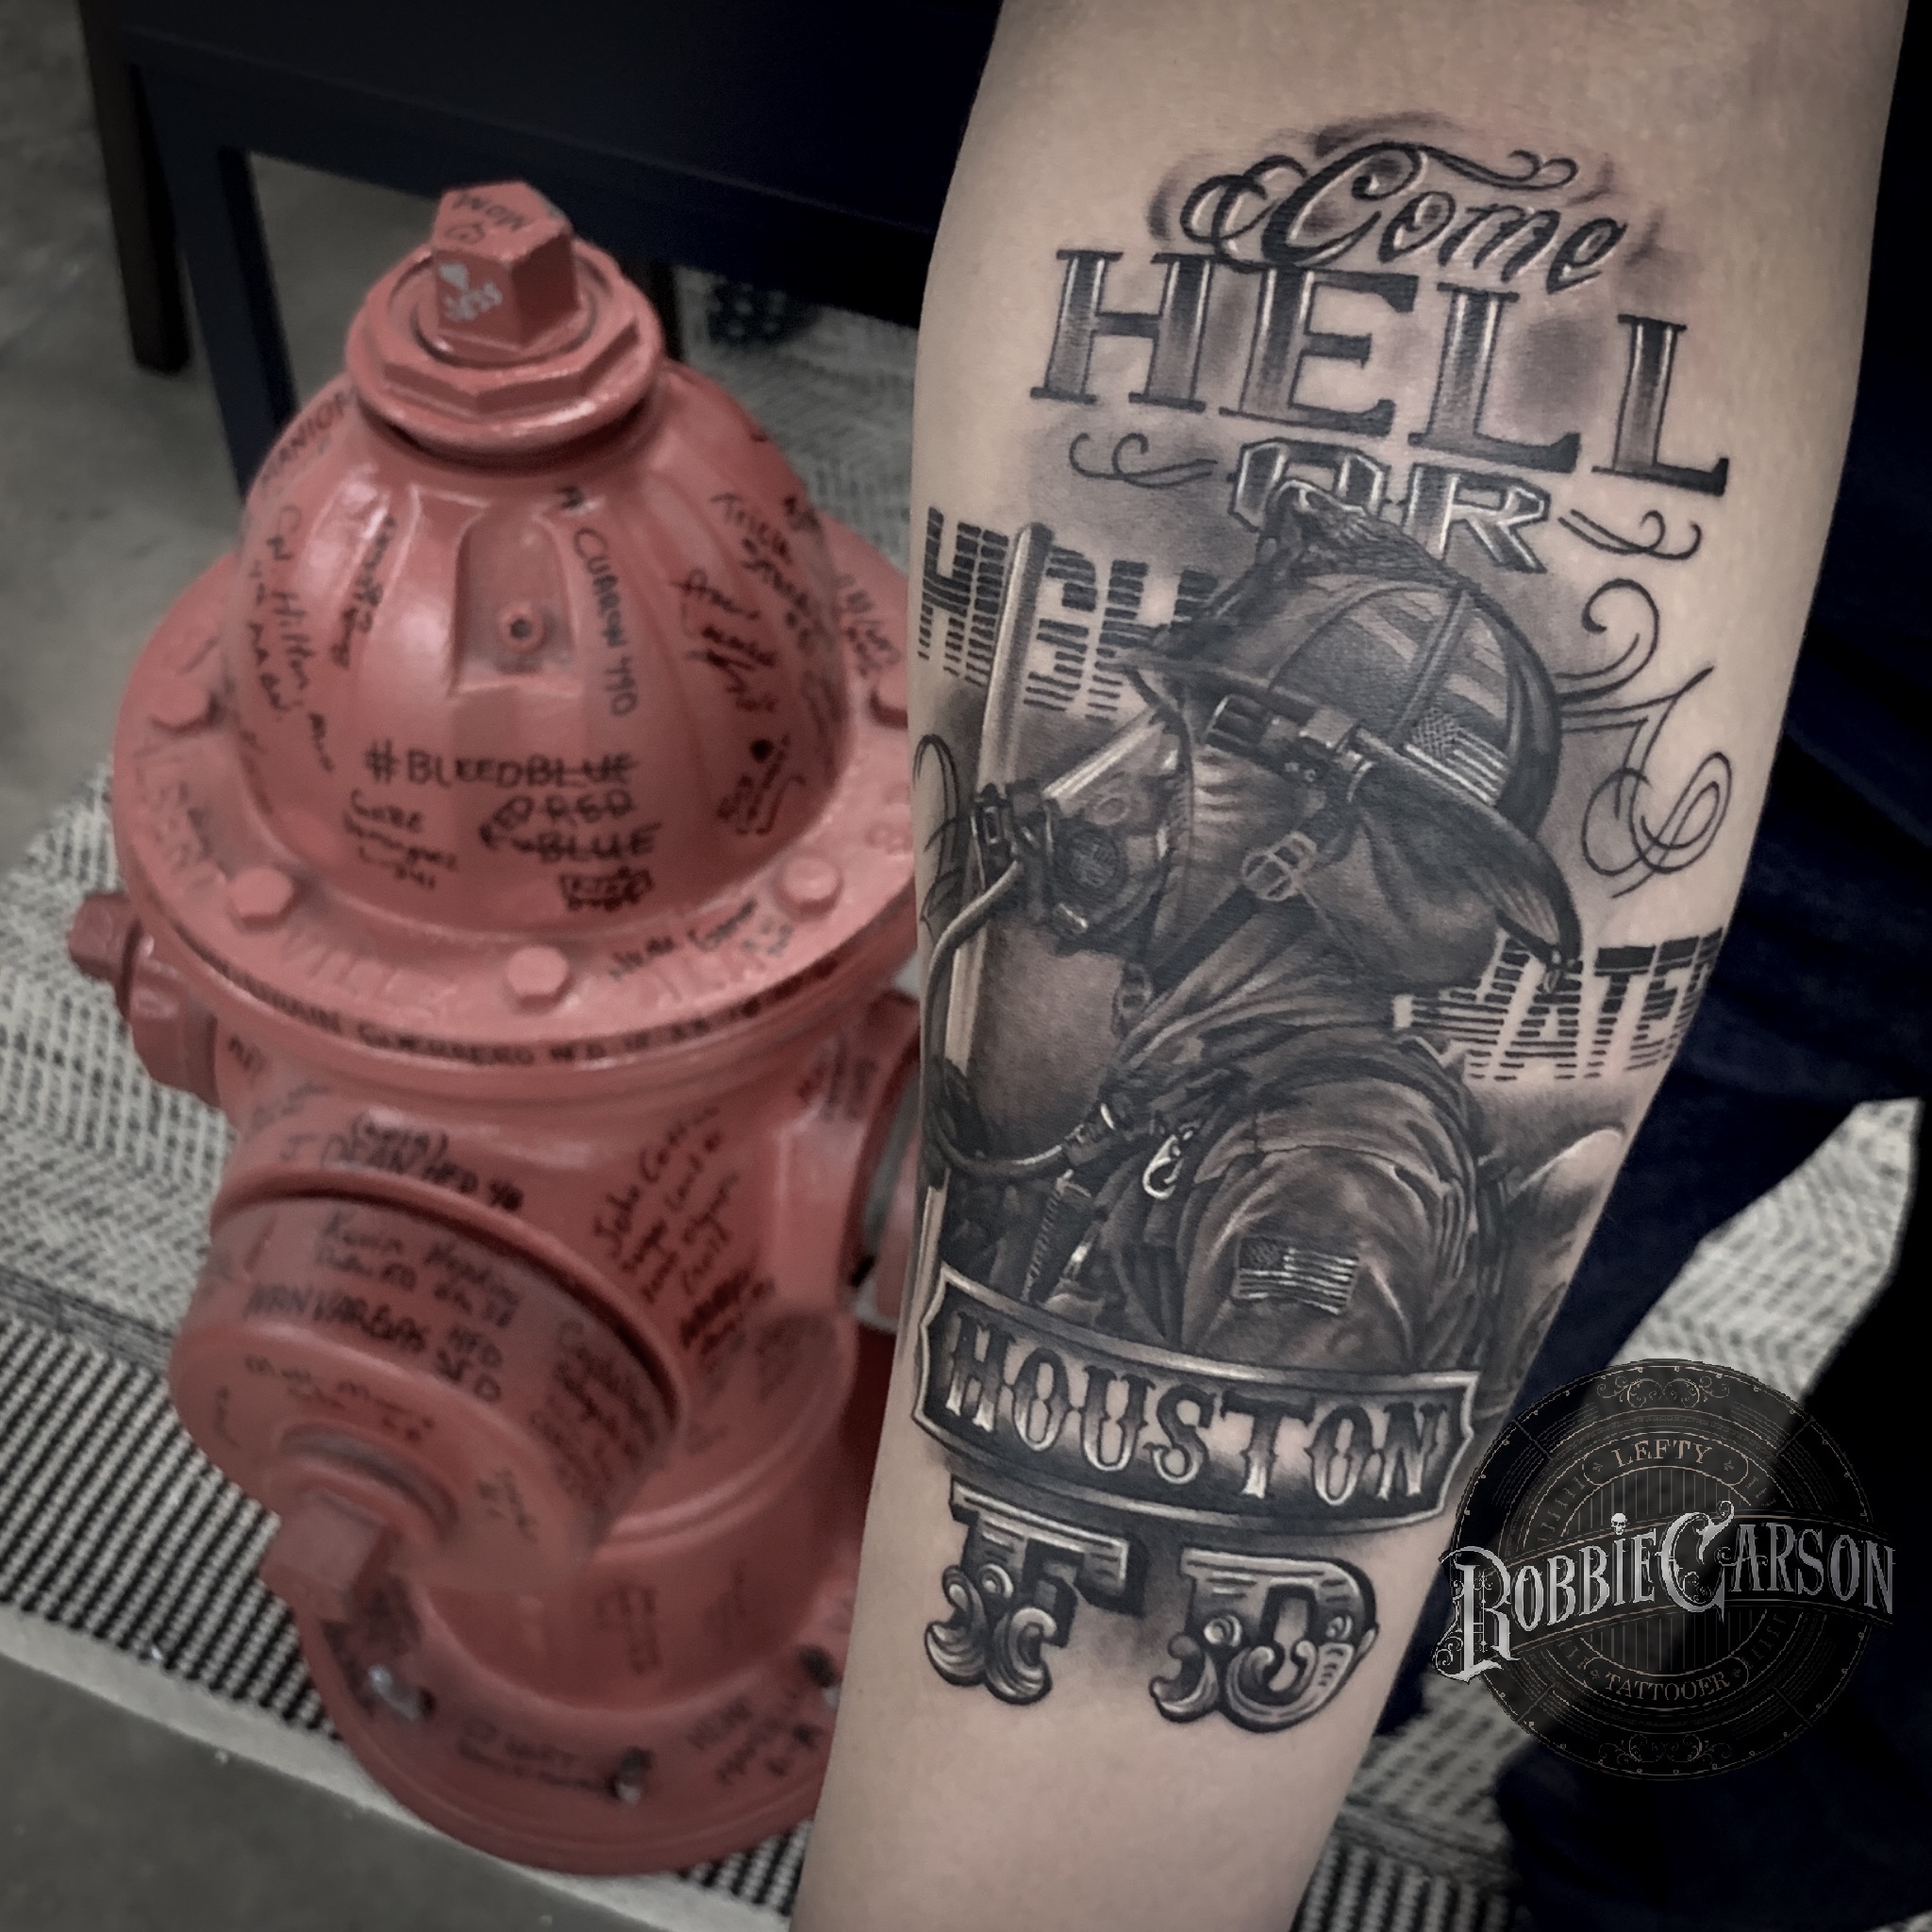 Stunning 23 Burning Hot Firefighter Tattoos You Need To See  Psycho Tats